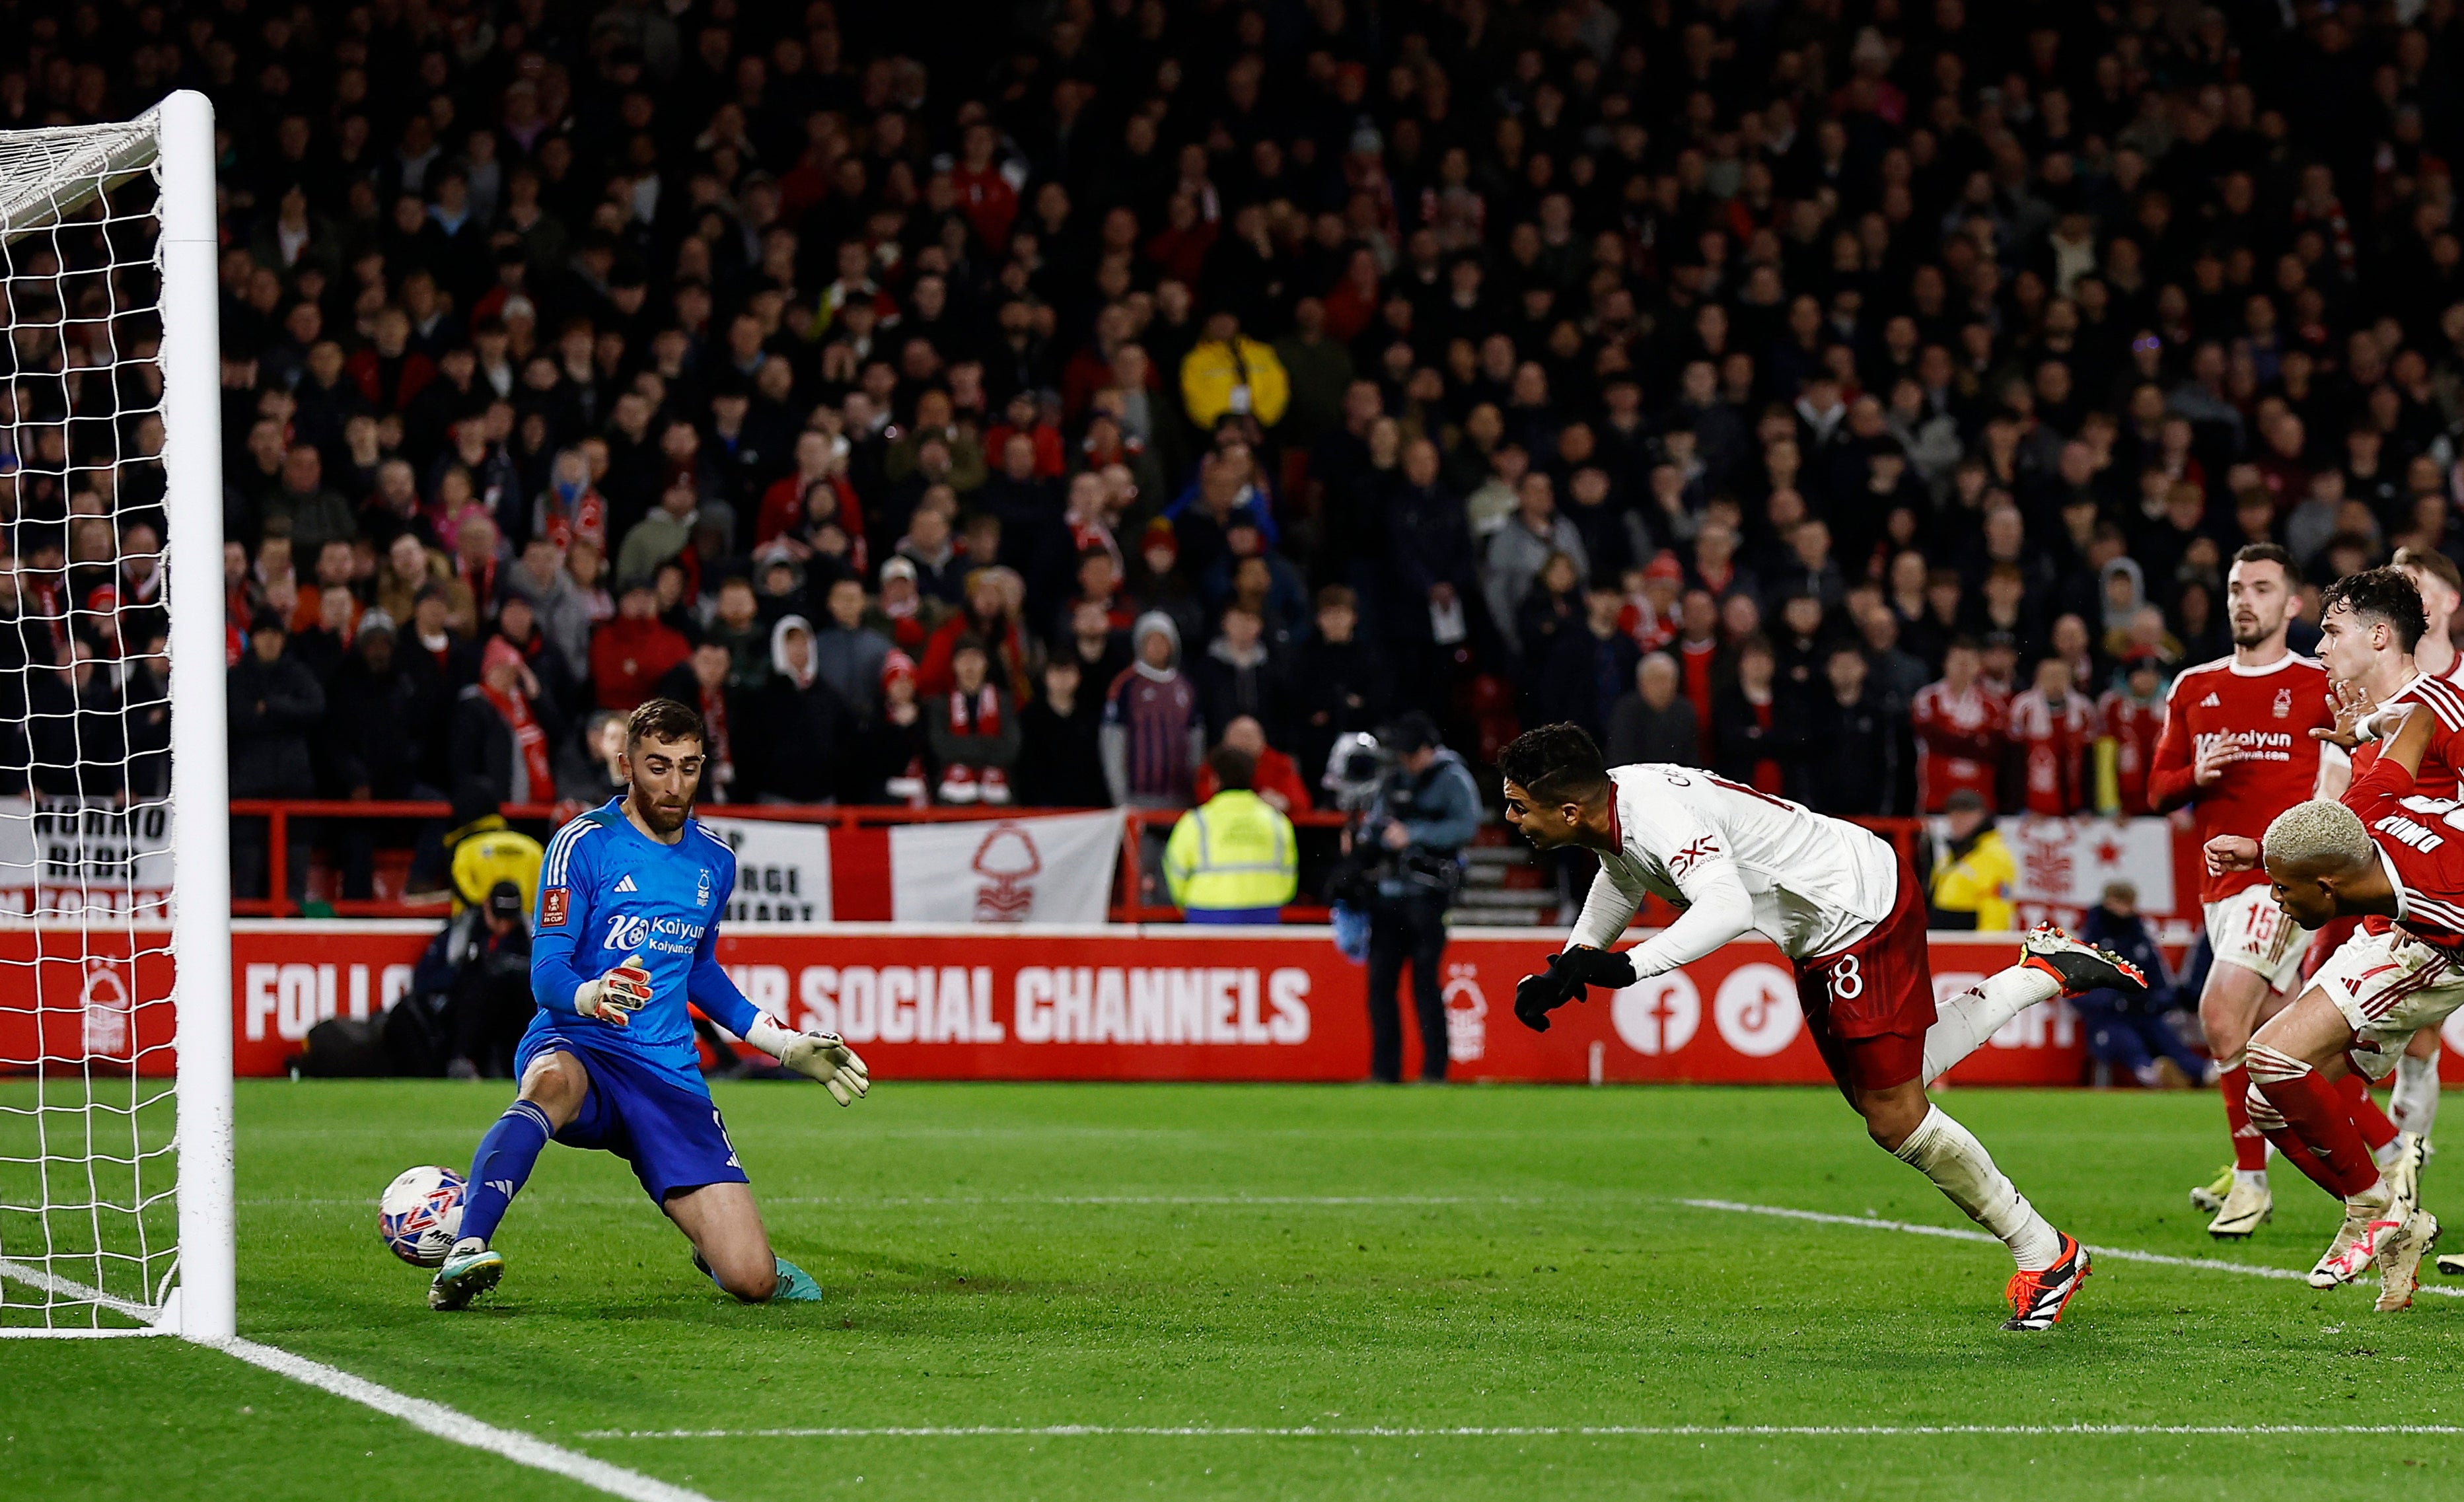 Casemiro’s lunging headed effort sent United into the next round